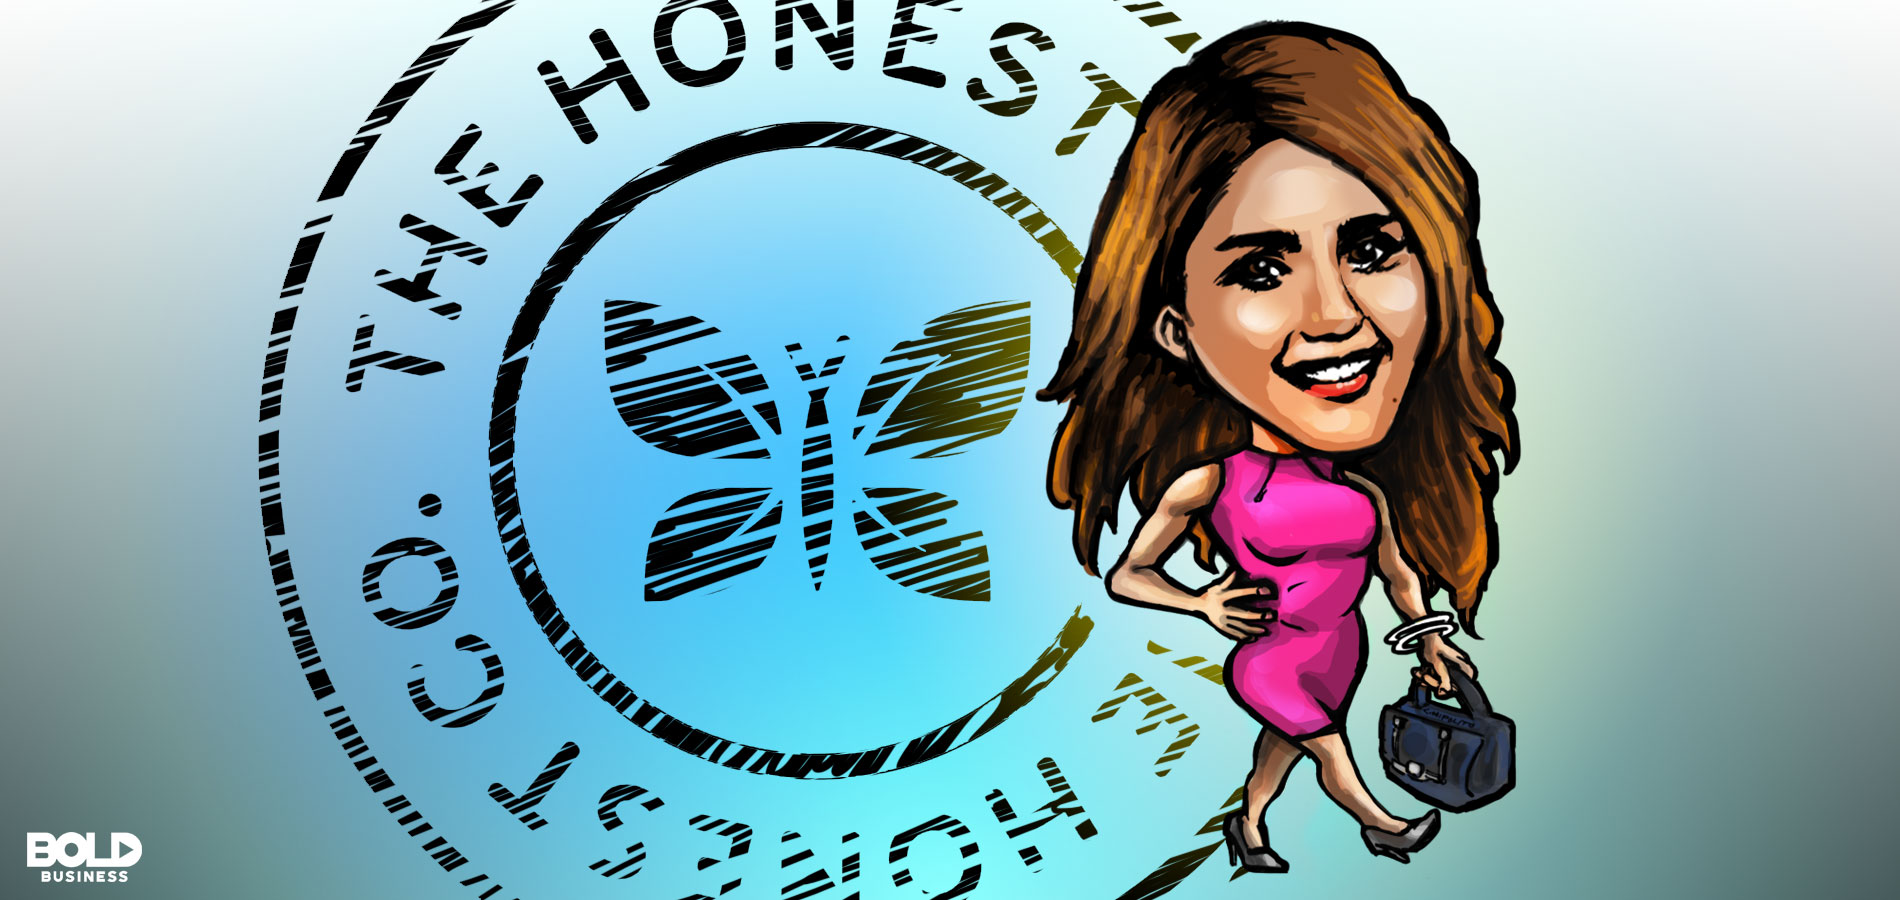 cartoon caricature of Jessica Alba, founder of The Honest Company, posing as the bold leader spotlight of the week